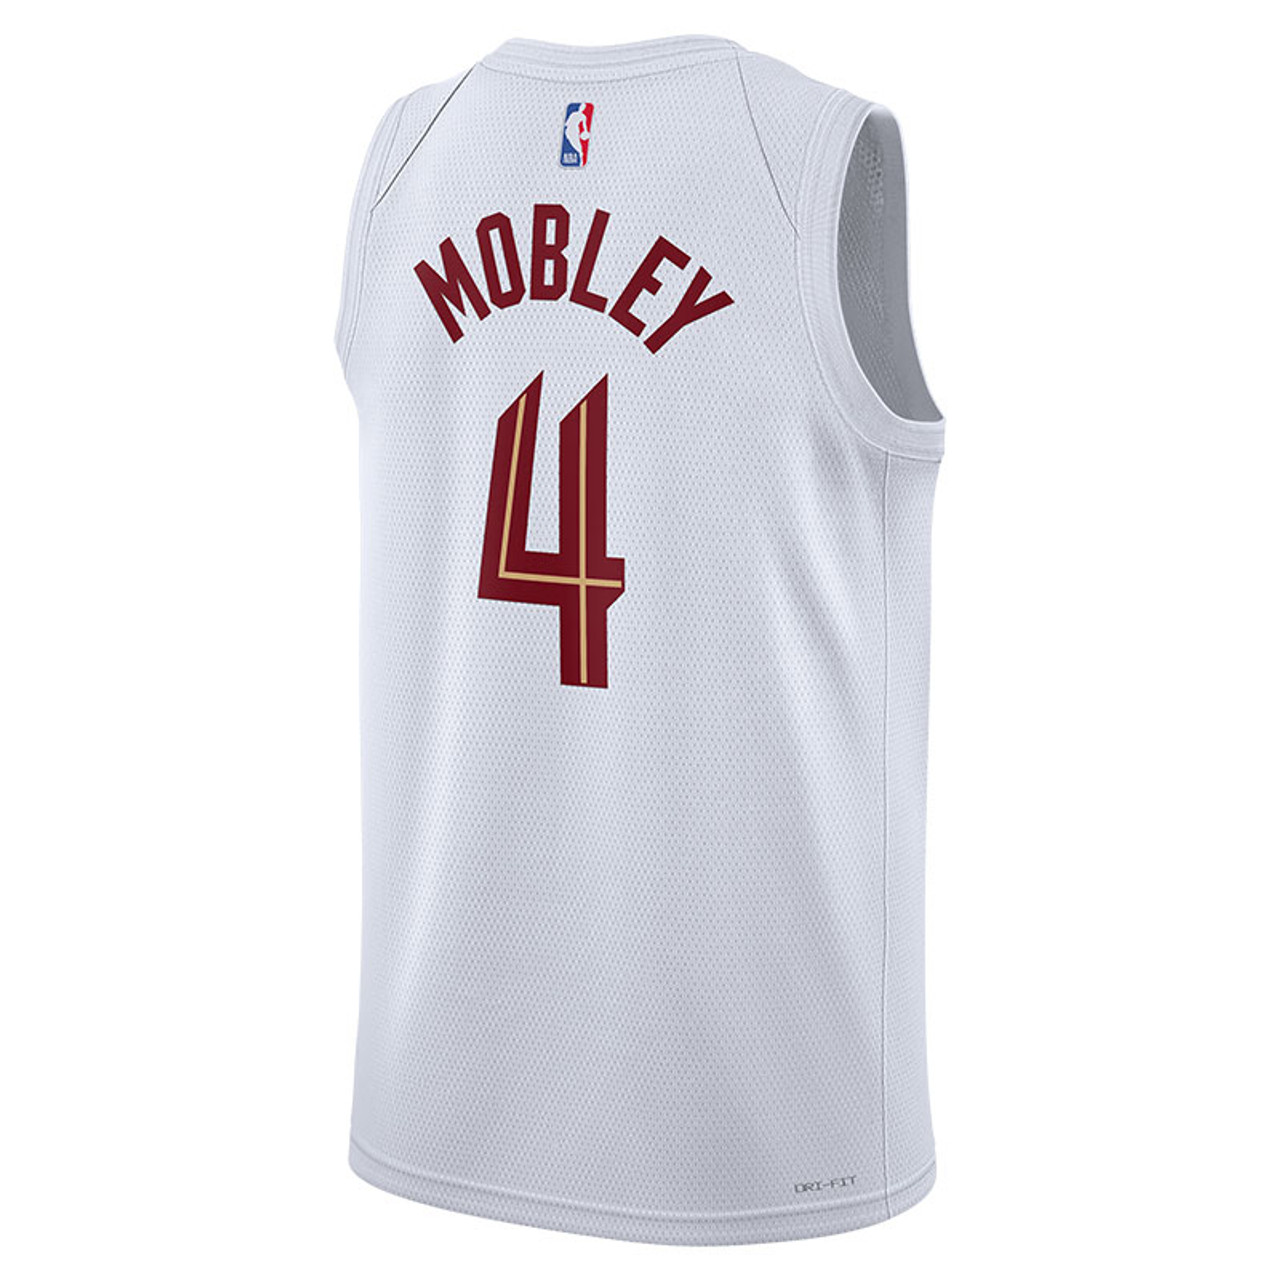 Evan Mobley's NBA Debut Game Worn Jersey. My #1 Cavs collectable